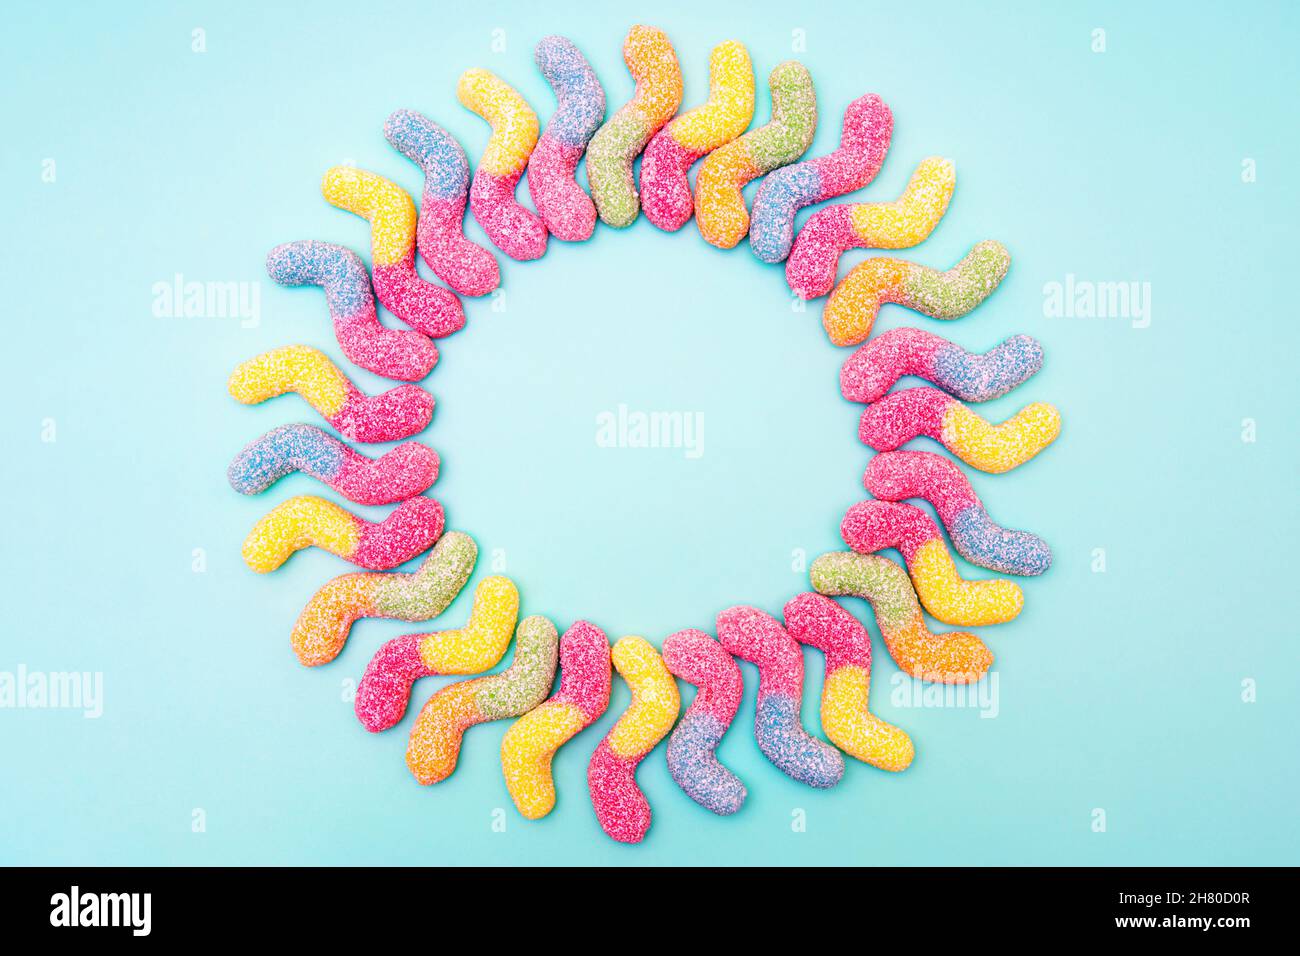 Sun made of z-shaped sugar coated gummy worms isolated on blue background Stock Photo